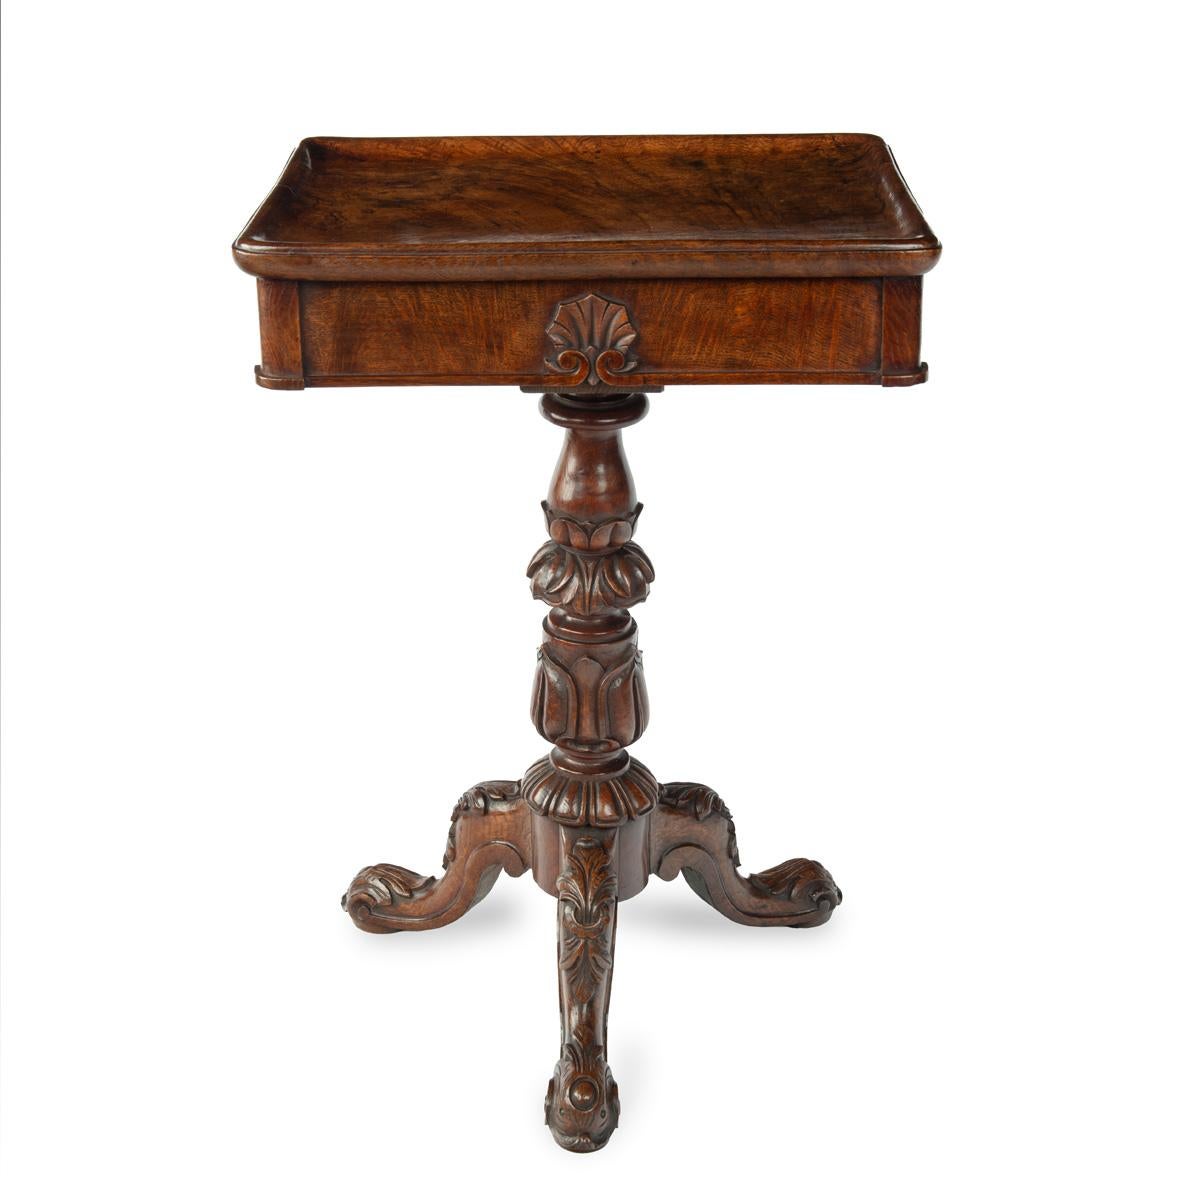 A George IV highly figured oak tripod side table attributed to Gillows, the rectangular top made from a single, solid piece of oak, with a frieze drawer on one end, raised on a turned, acanthus carved baluster support with three scroll legs.